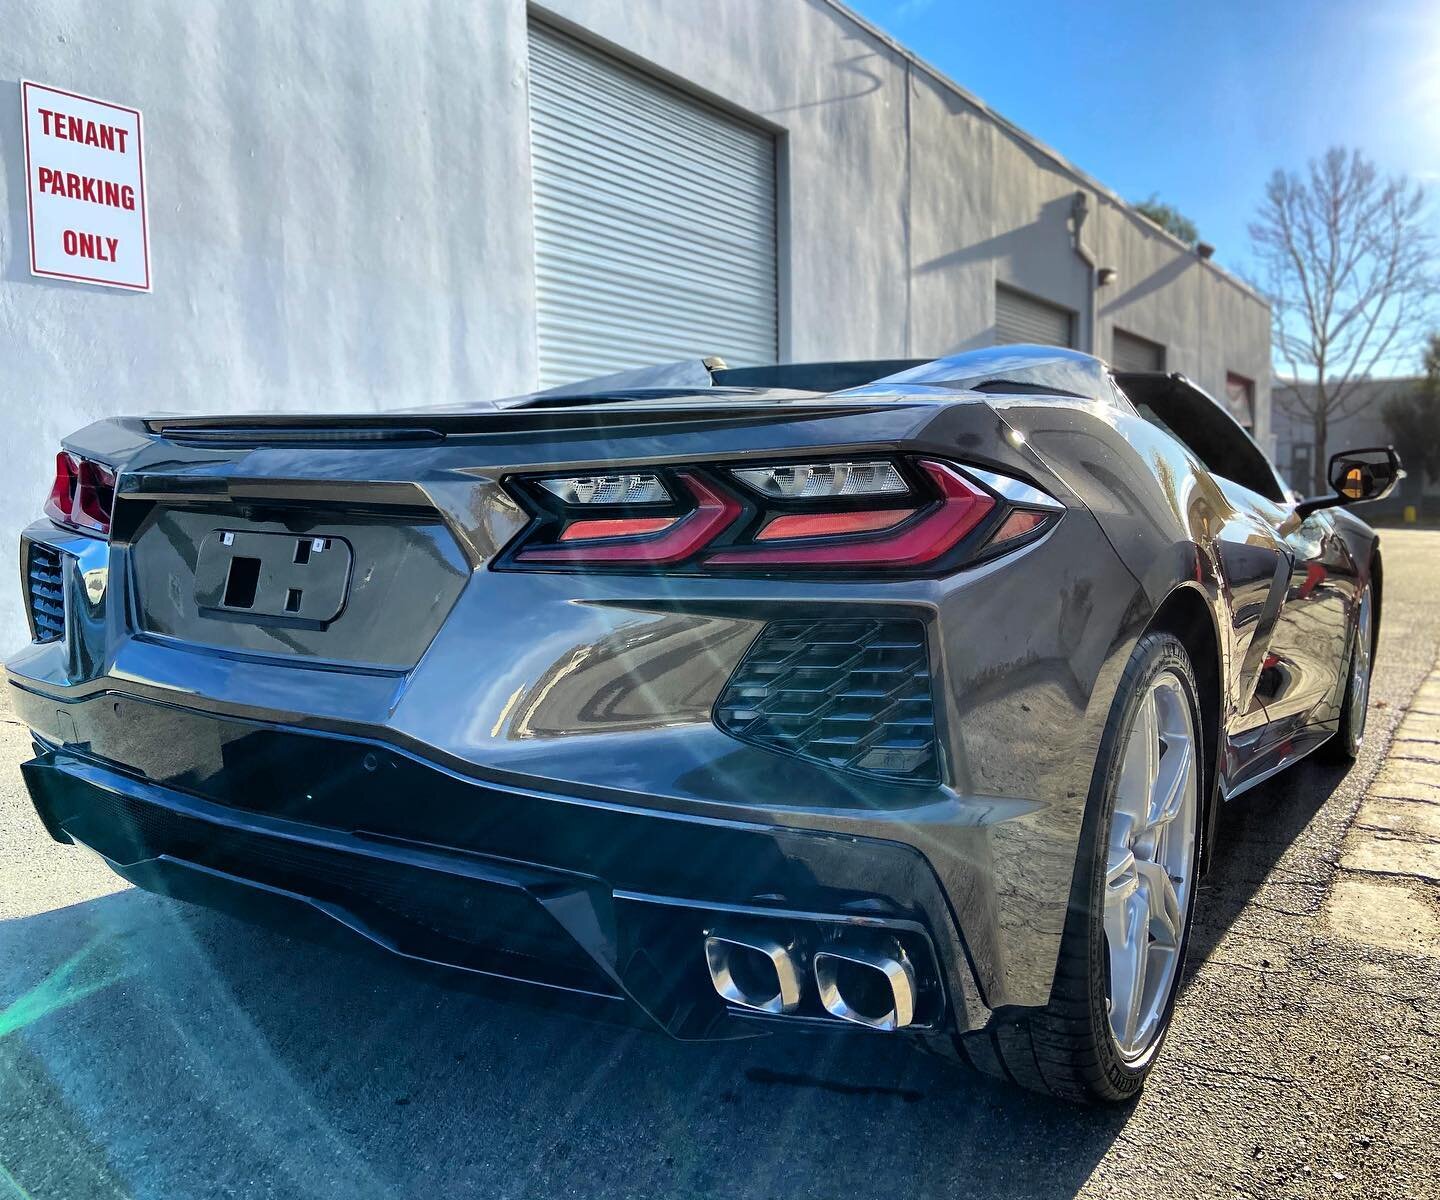 #c8 came in for a #stekdynoshield paint protection film full front package, a #ceramicpro gold coating, smoked film headlights, and all glass heat rejection window tint✨ 

protect your investment with @toptobottom_detailing 

951.775.7662
sales@topto